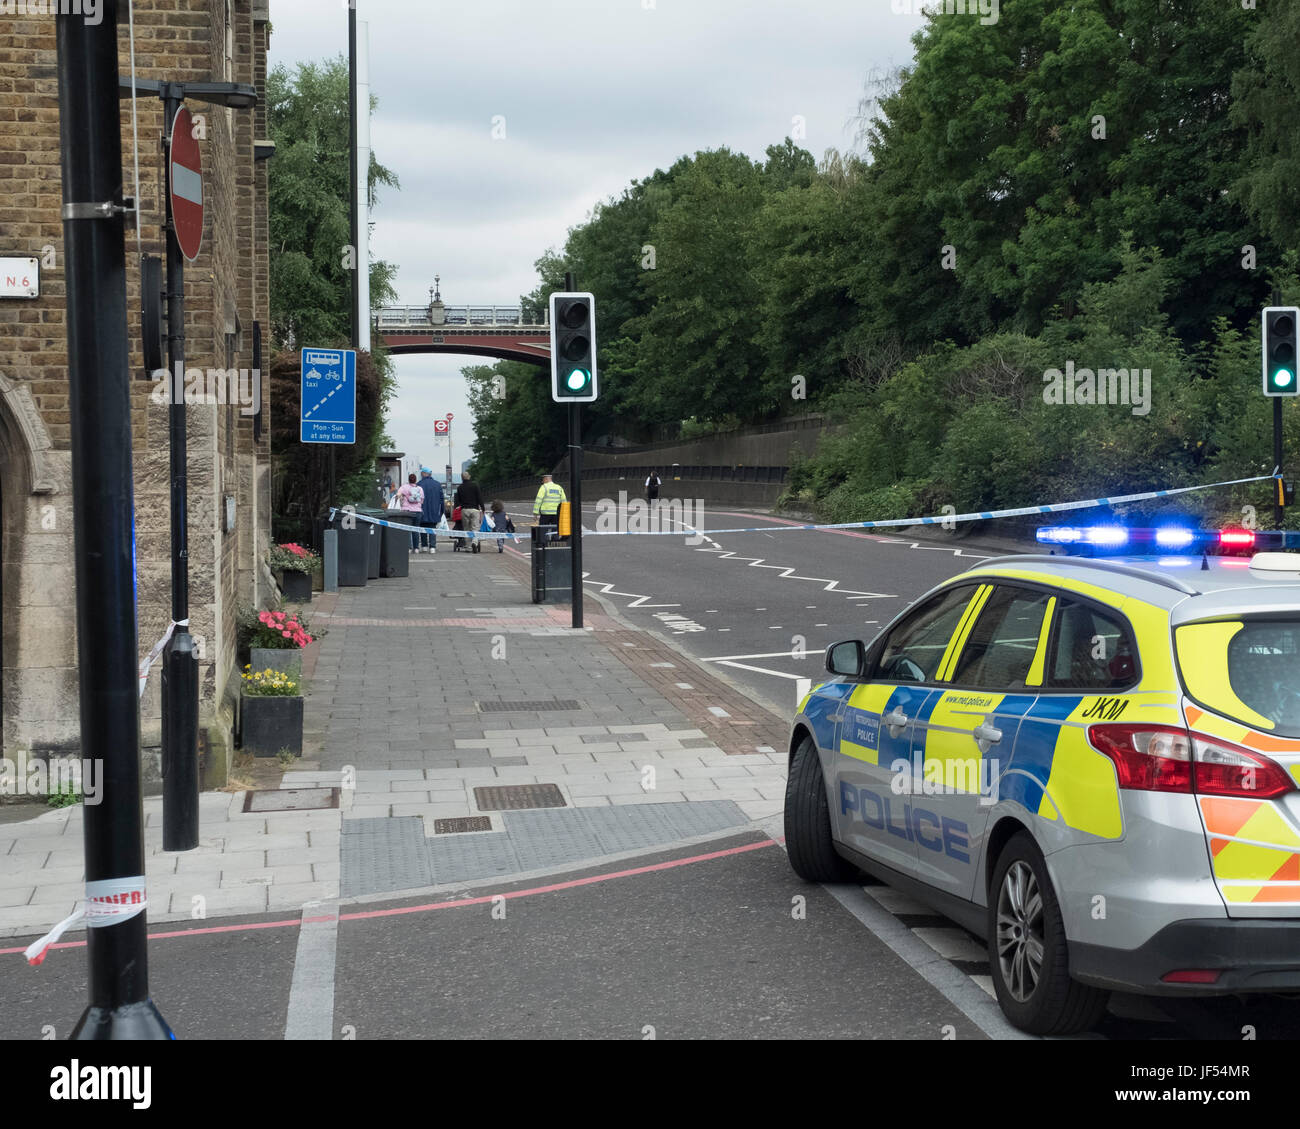 Archway Road, North London, 29th June 2017. Traffic was closed in both directions early Thursday evening while emergency services responded to a serious injury. The cause is currently unknown. Credit: Thomas Carver/Alamy Live News Stock Photo